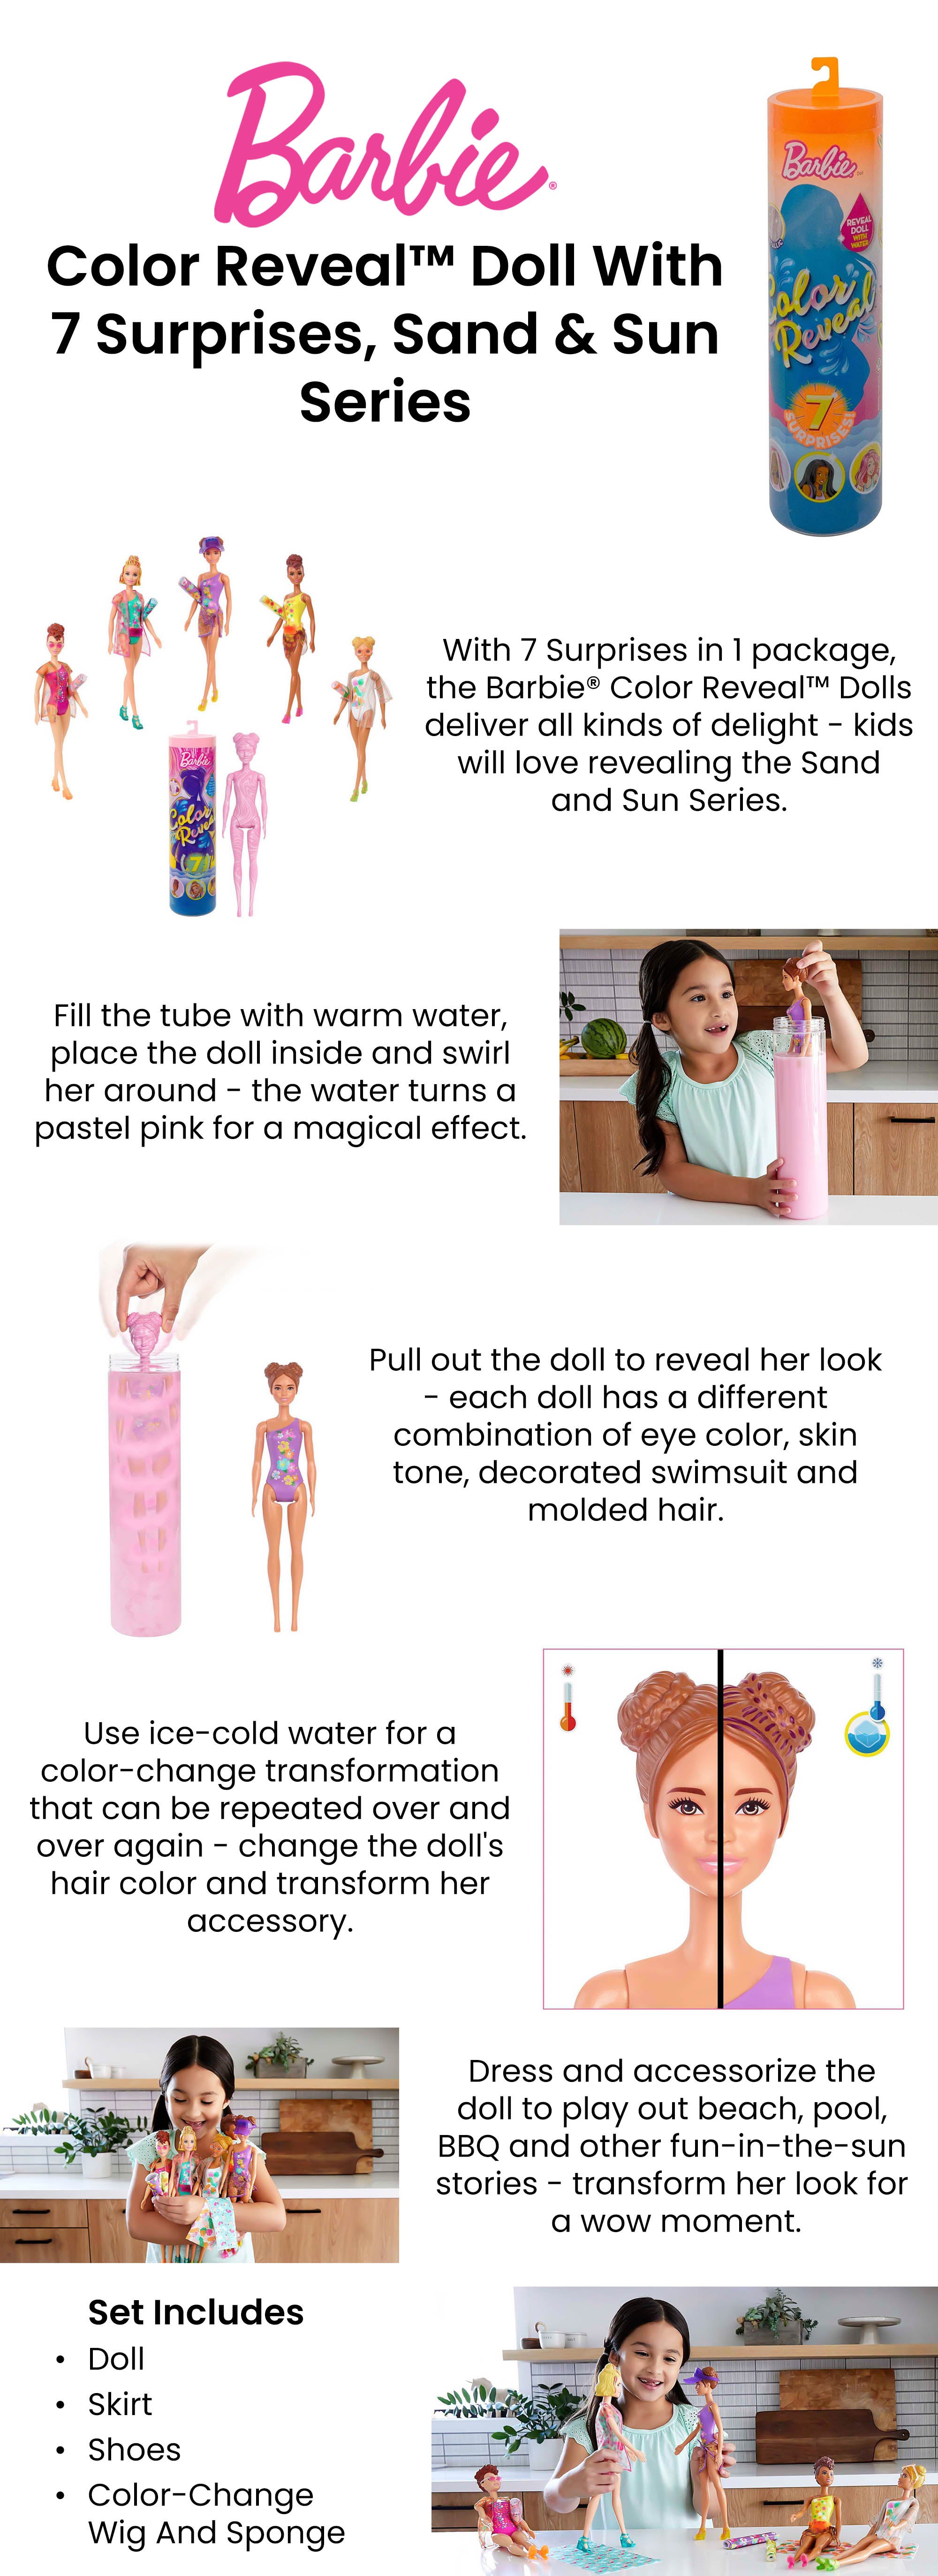 Barbie 7 Surprises - Colour Reveal Doll With Water And Surprise Accessories  For Kids Egypt